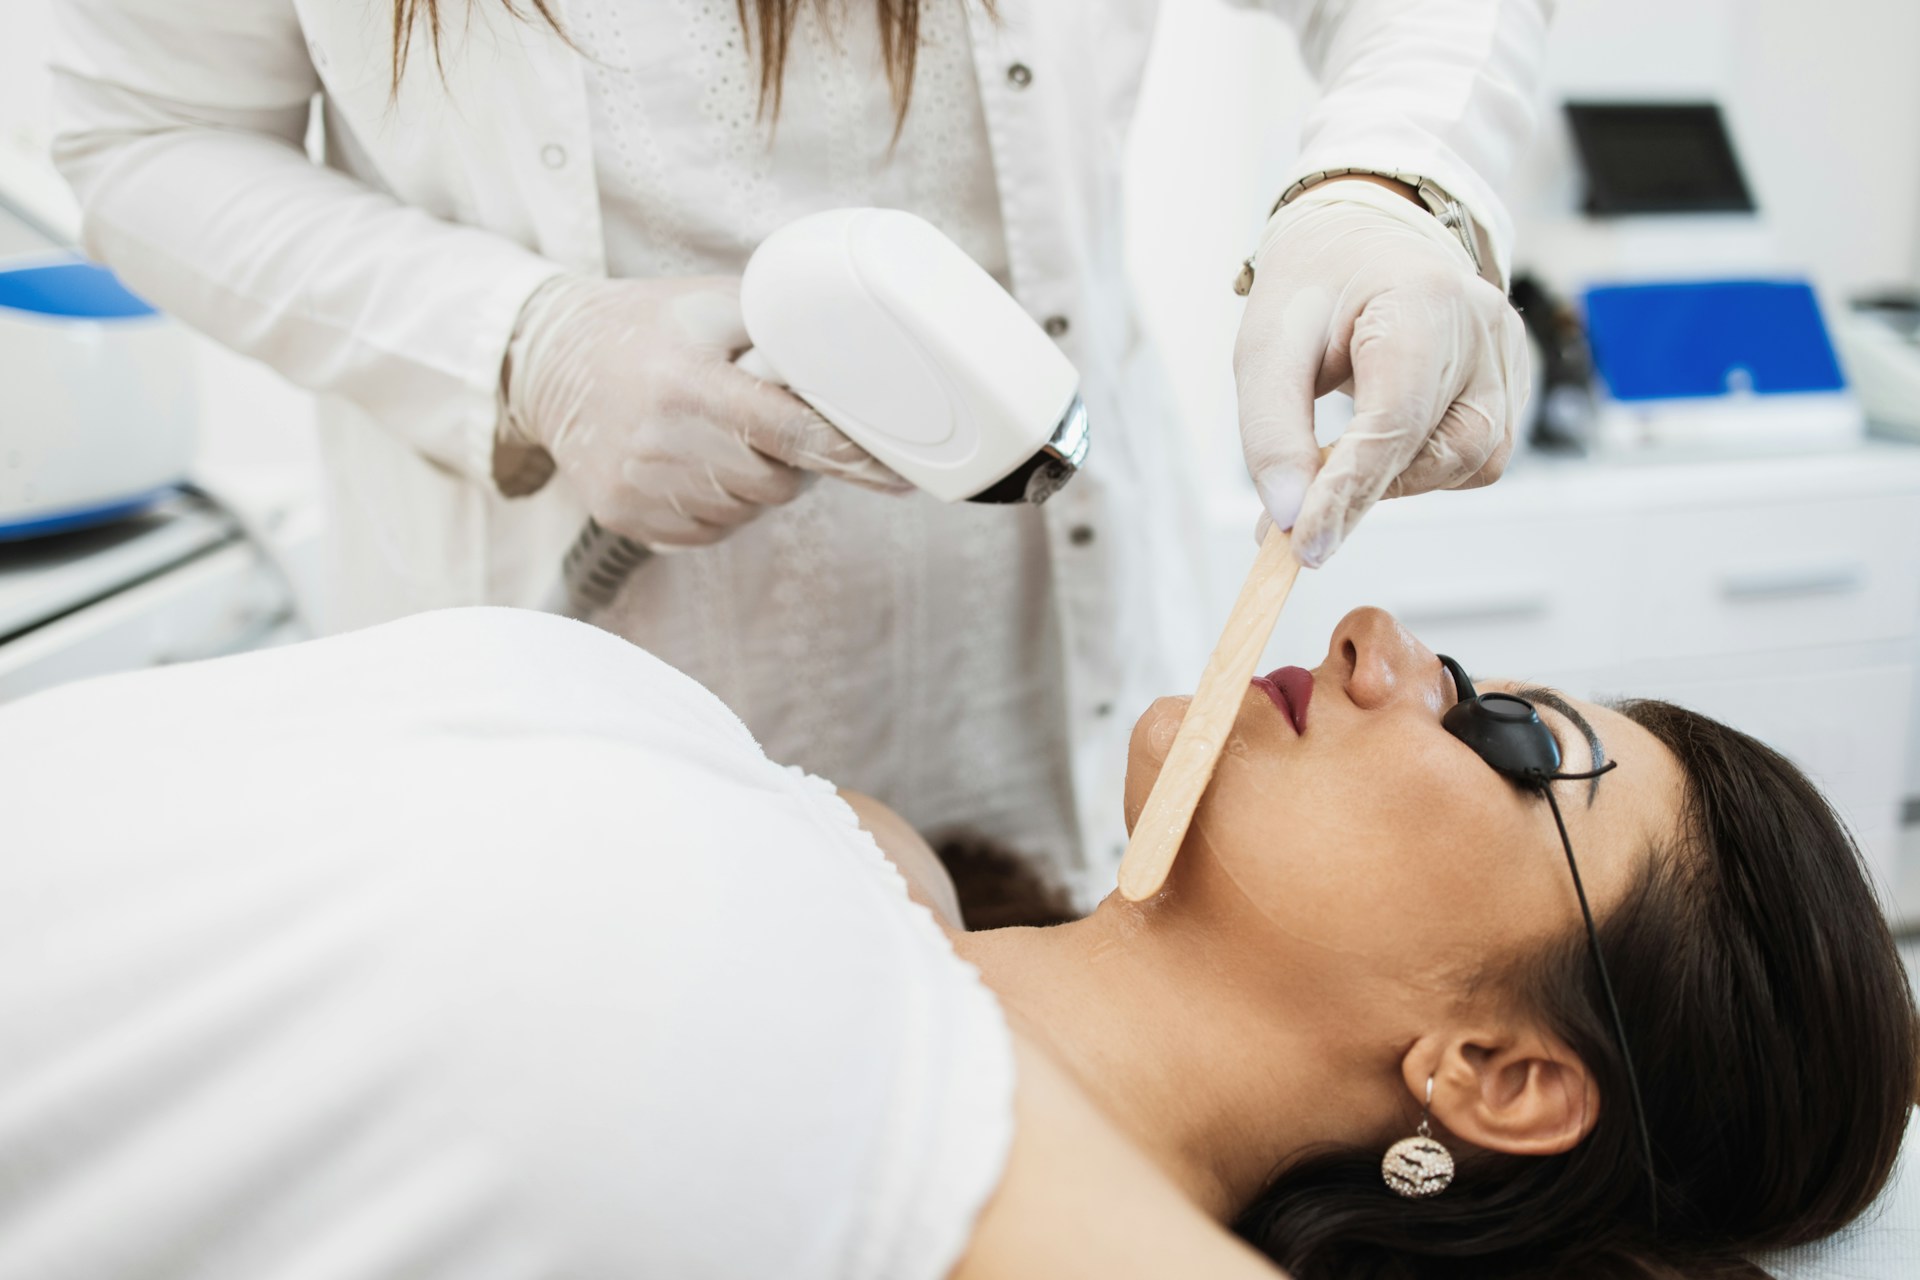 Lead the Way with Laser Treatments: Discover Grayclay’s Class 4 Laser Licensing Course